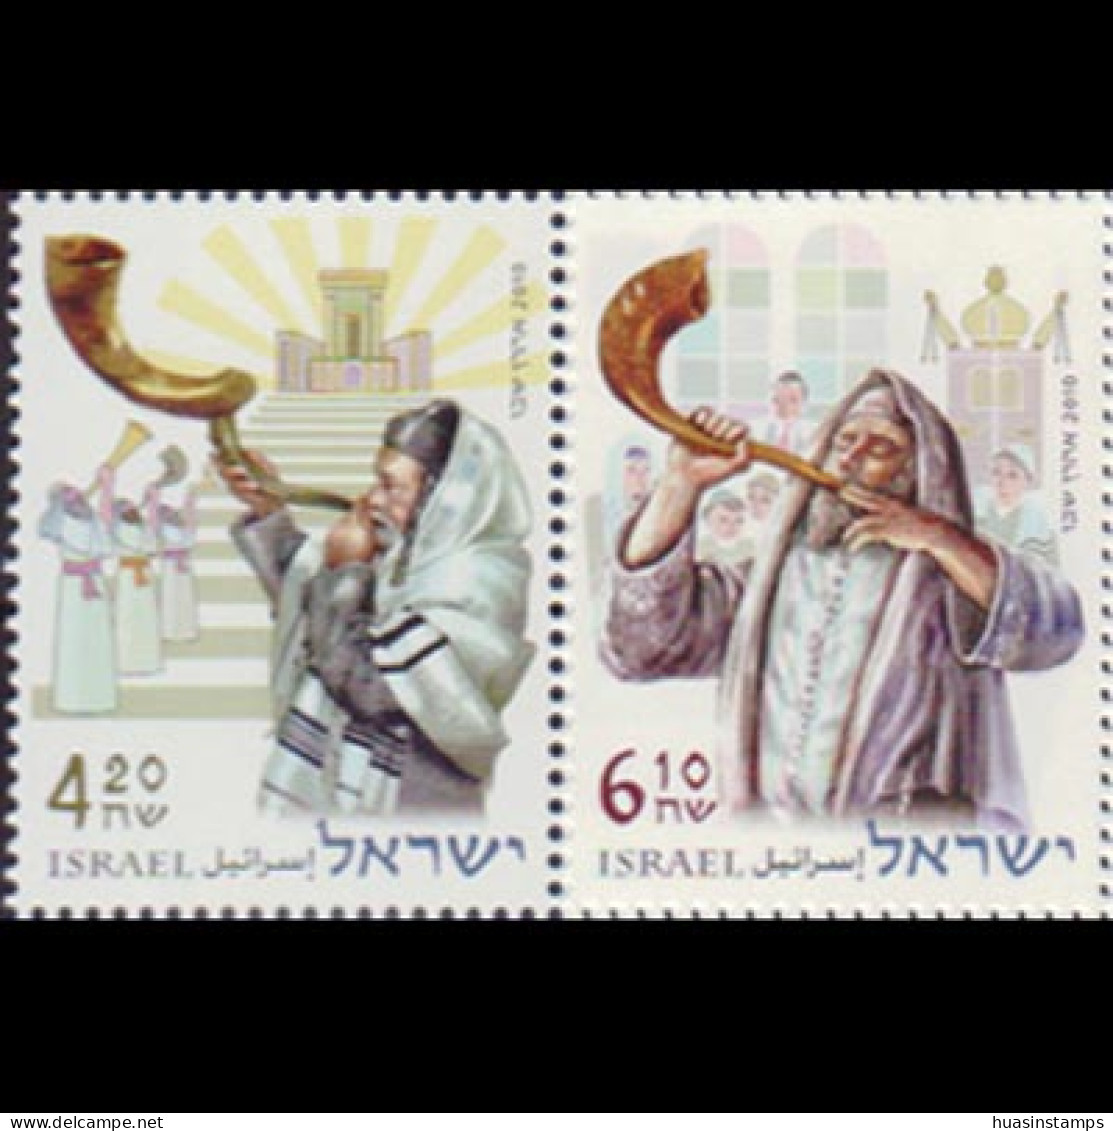 ISRAEL 2010 - Scott# 1830-1 Shofar Blowers 4.2-6.1s MNH - Unused Stamps (without Tabs)